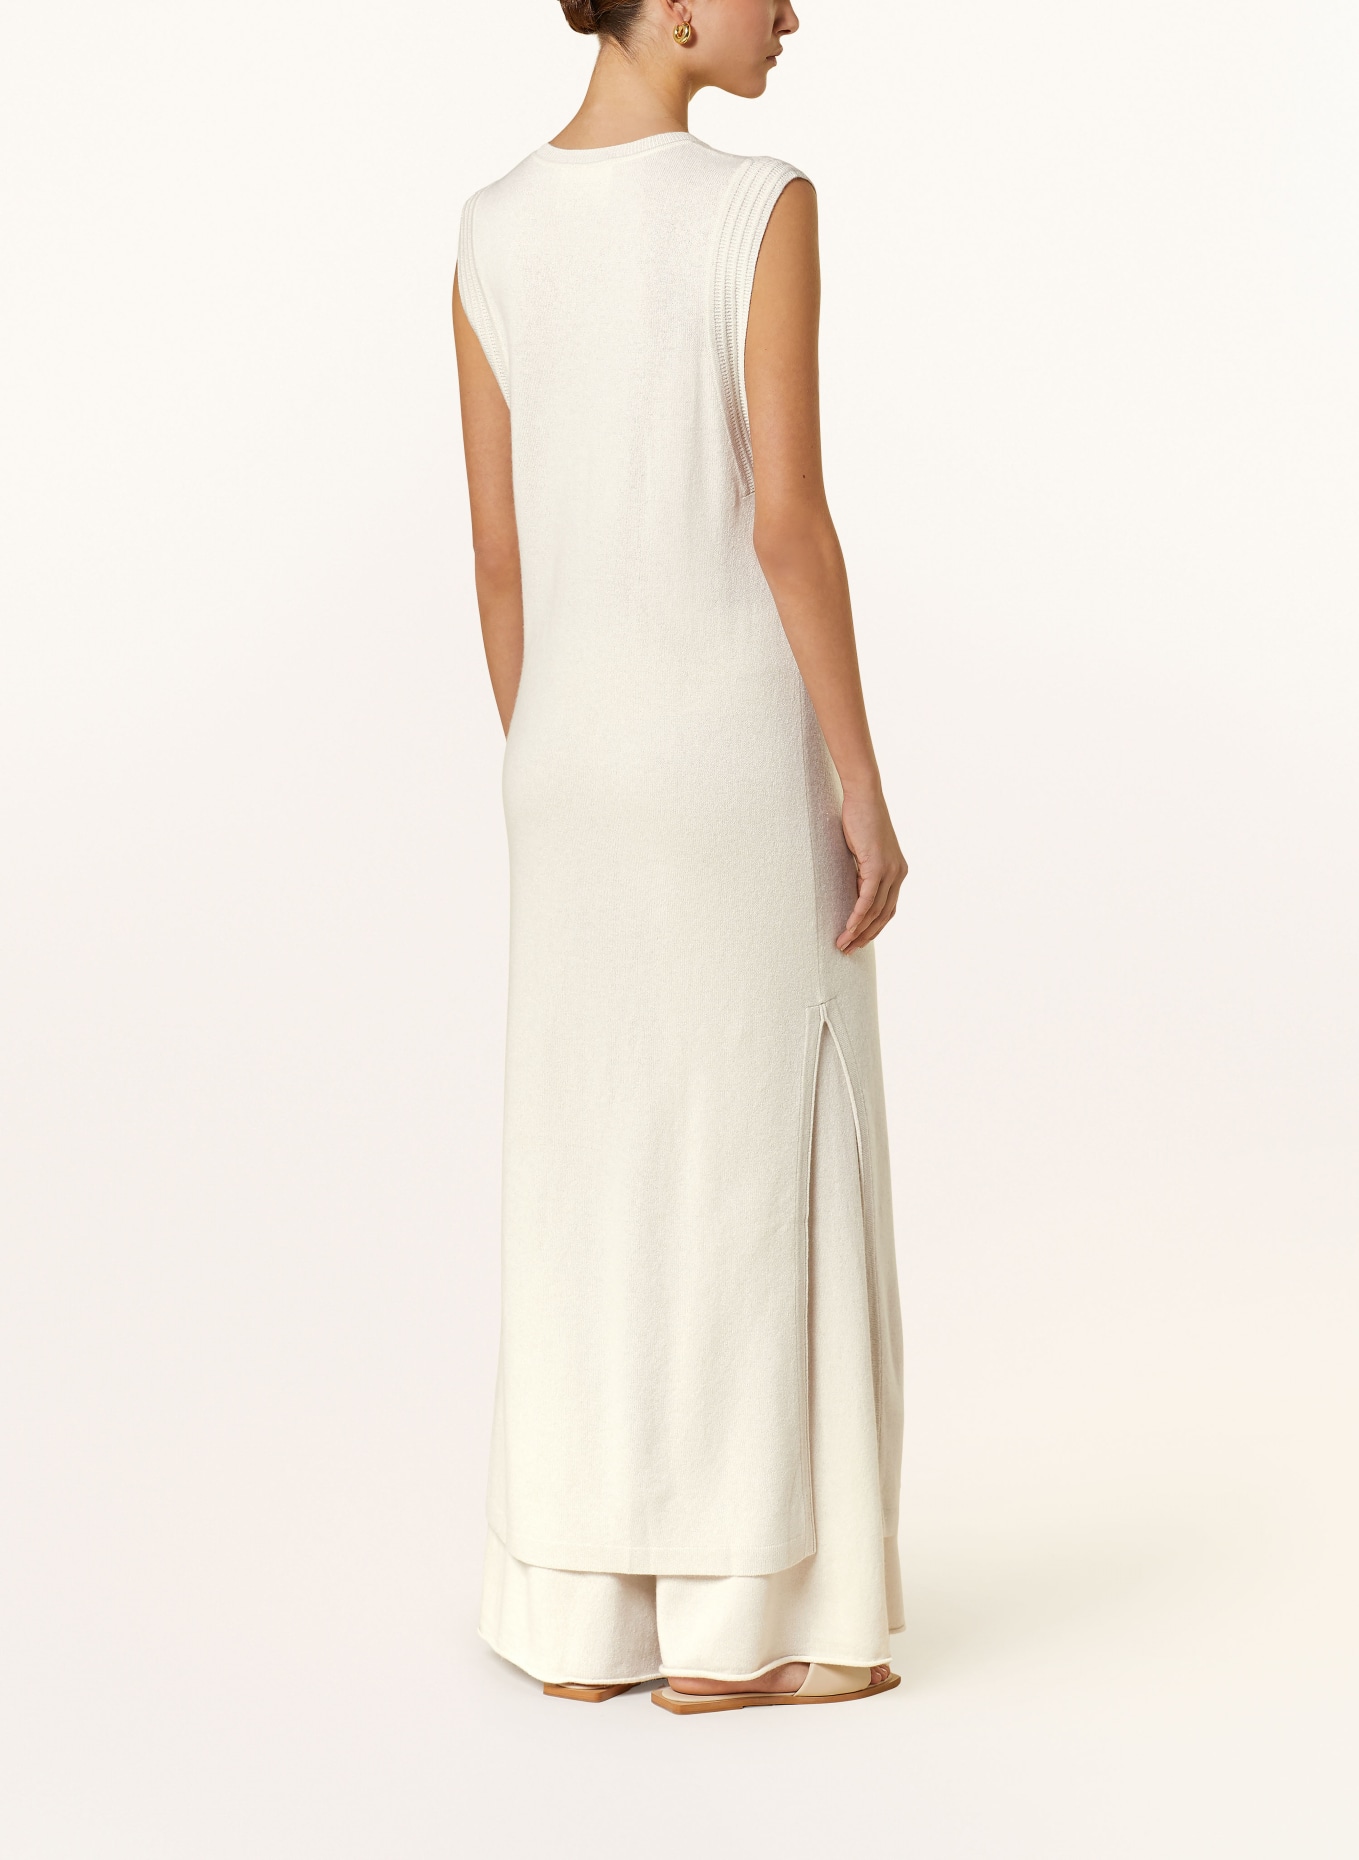 LISA YANG Knit dress made of cashmere with glitter thread, Color: CREAM (Image 3)